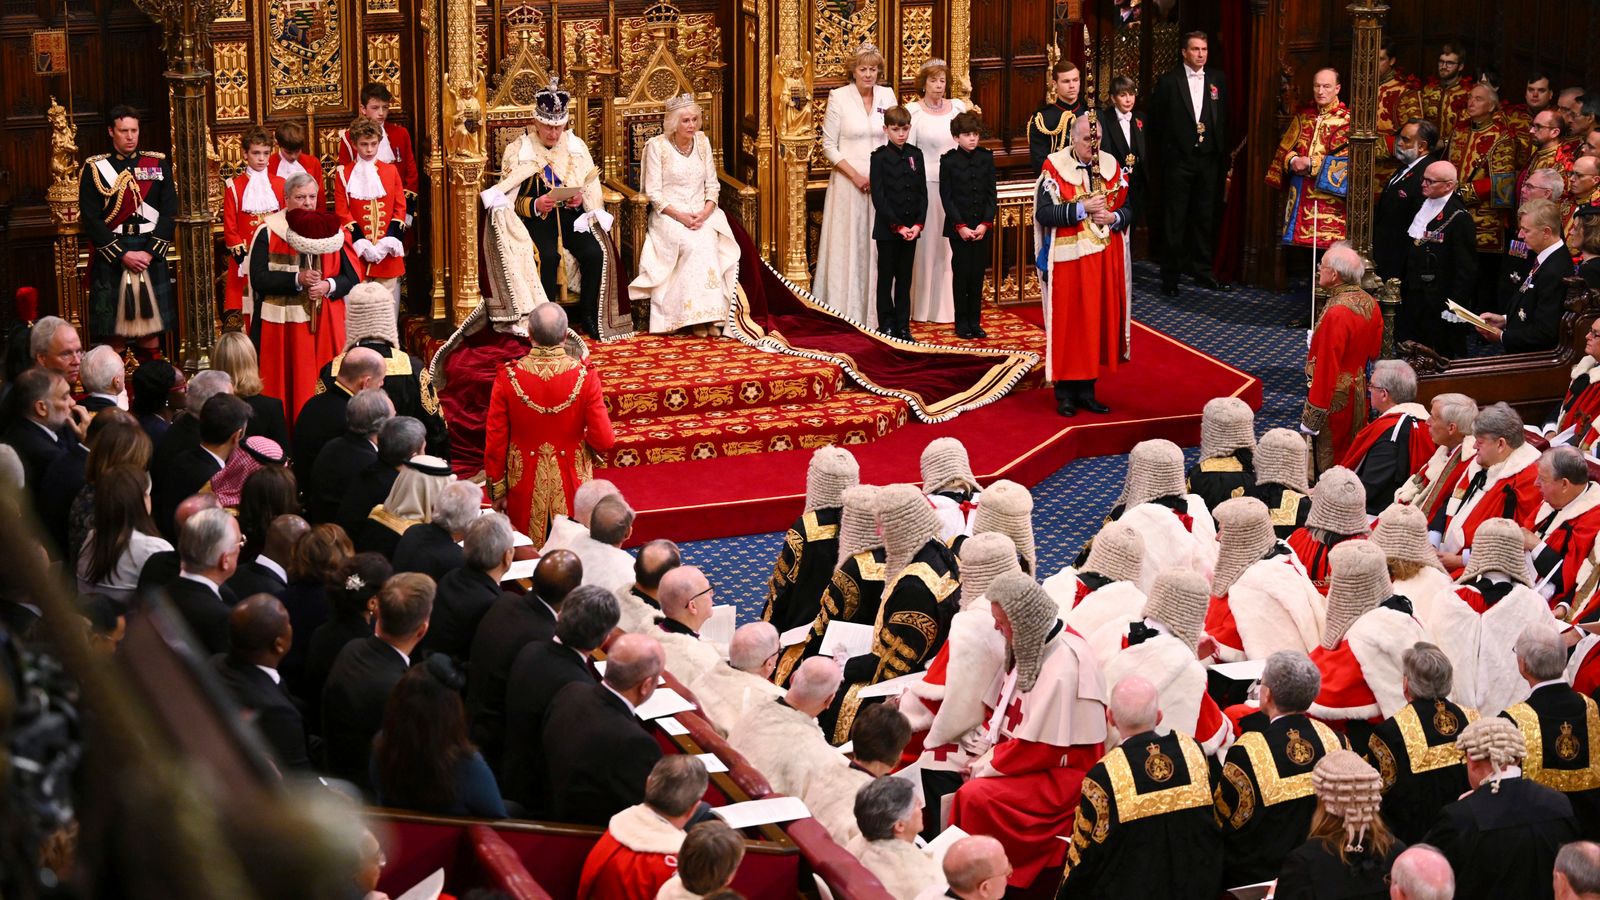 Full list of announcements in the King's Speech